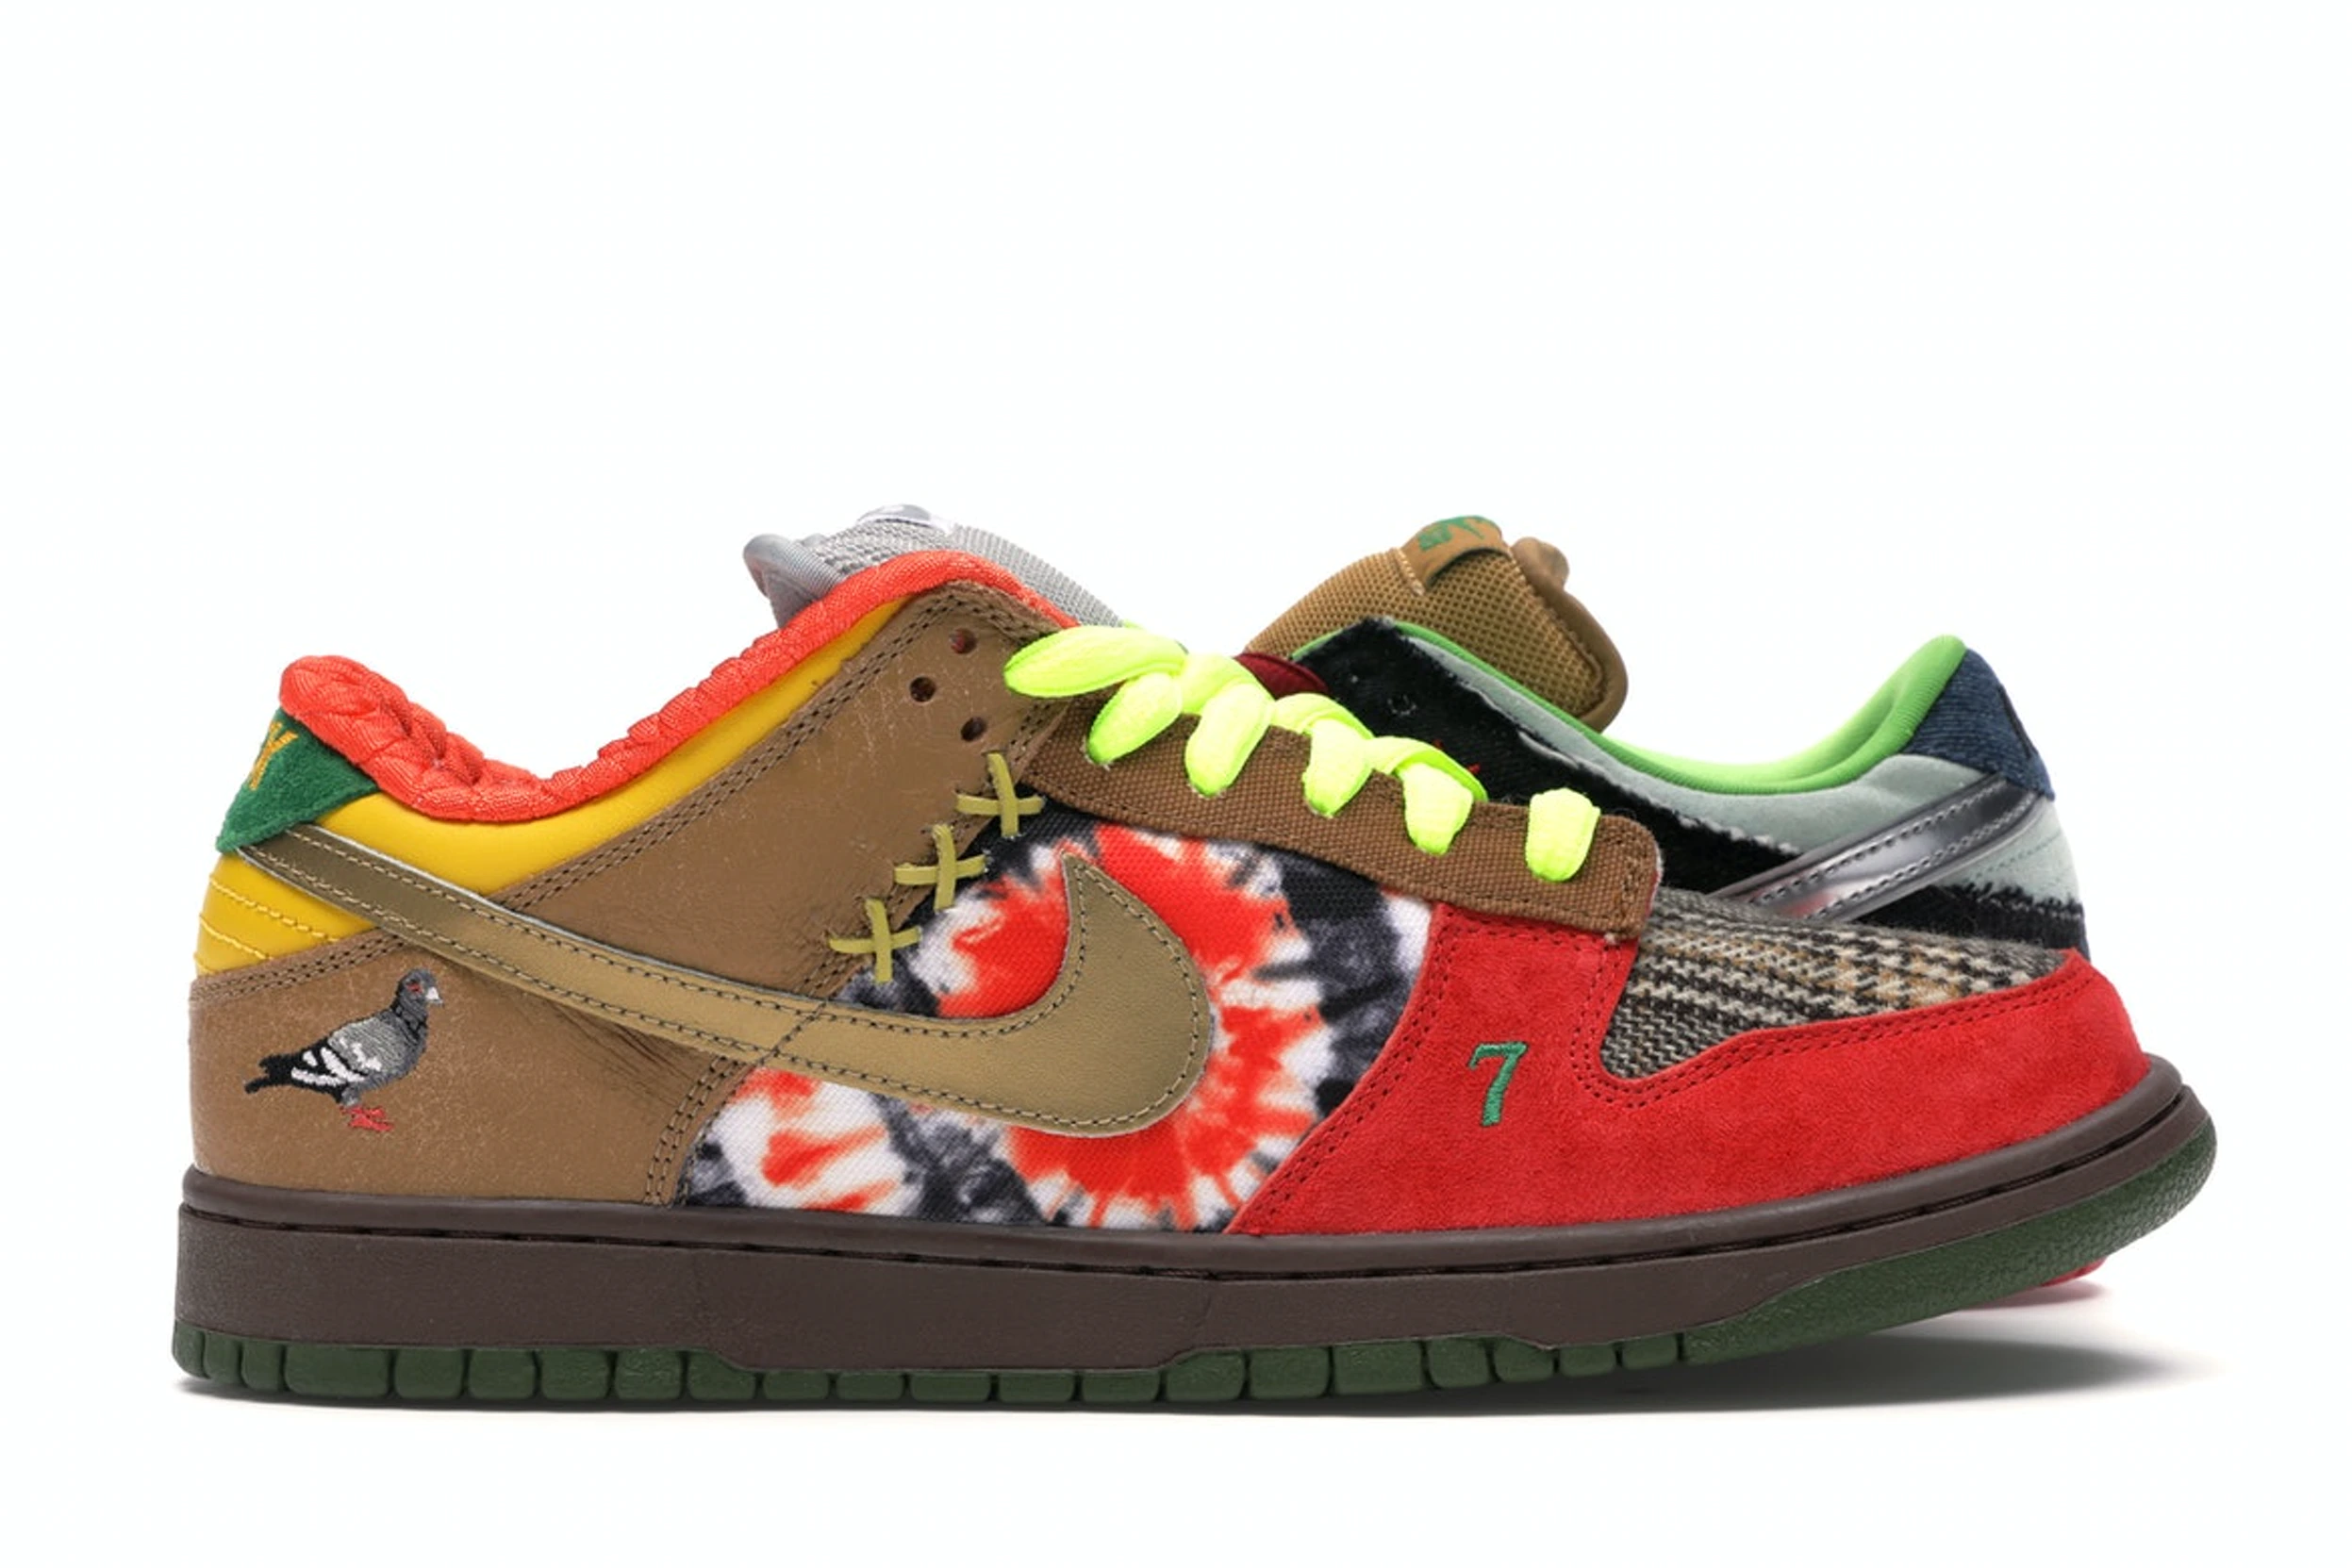 Nike Dunk SB Low What the Dunk